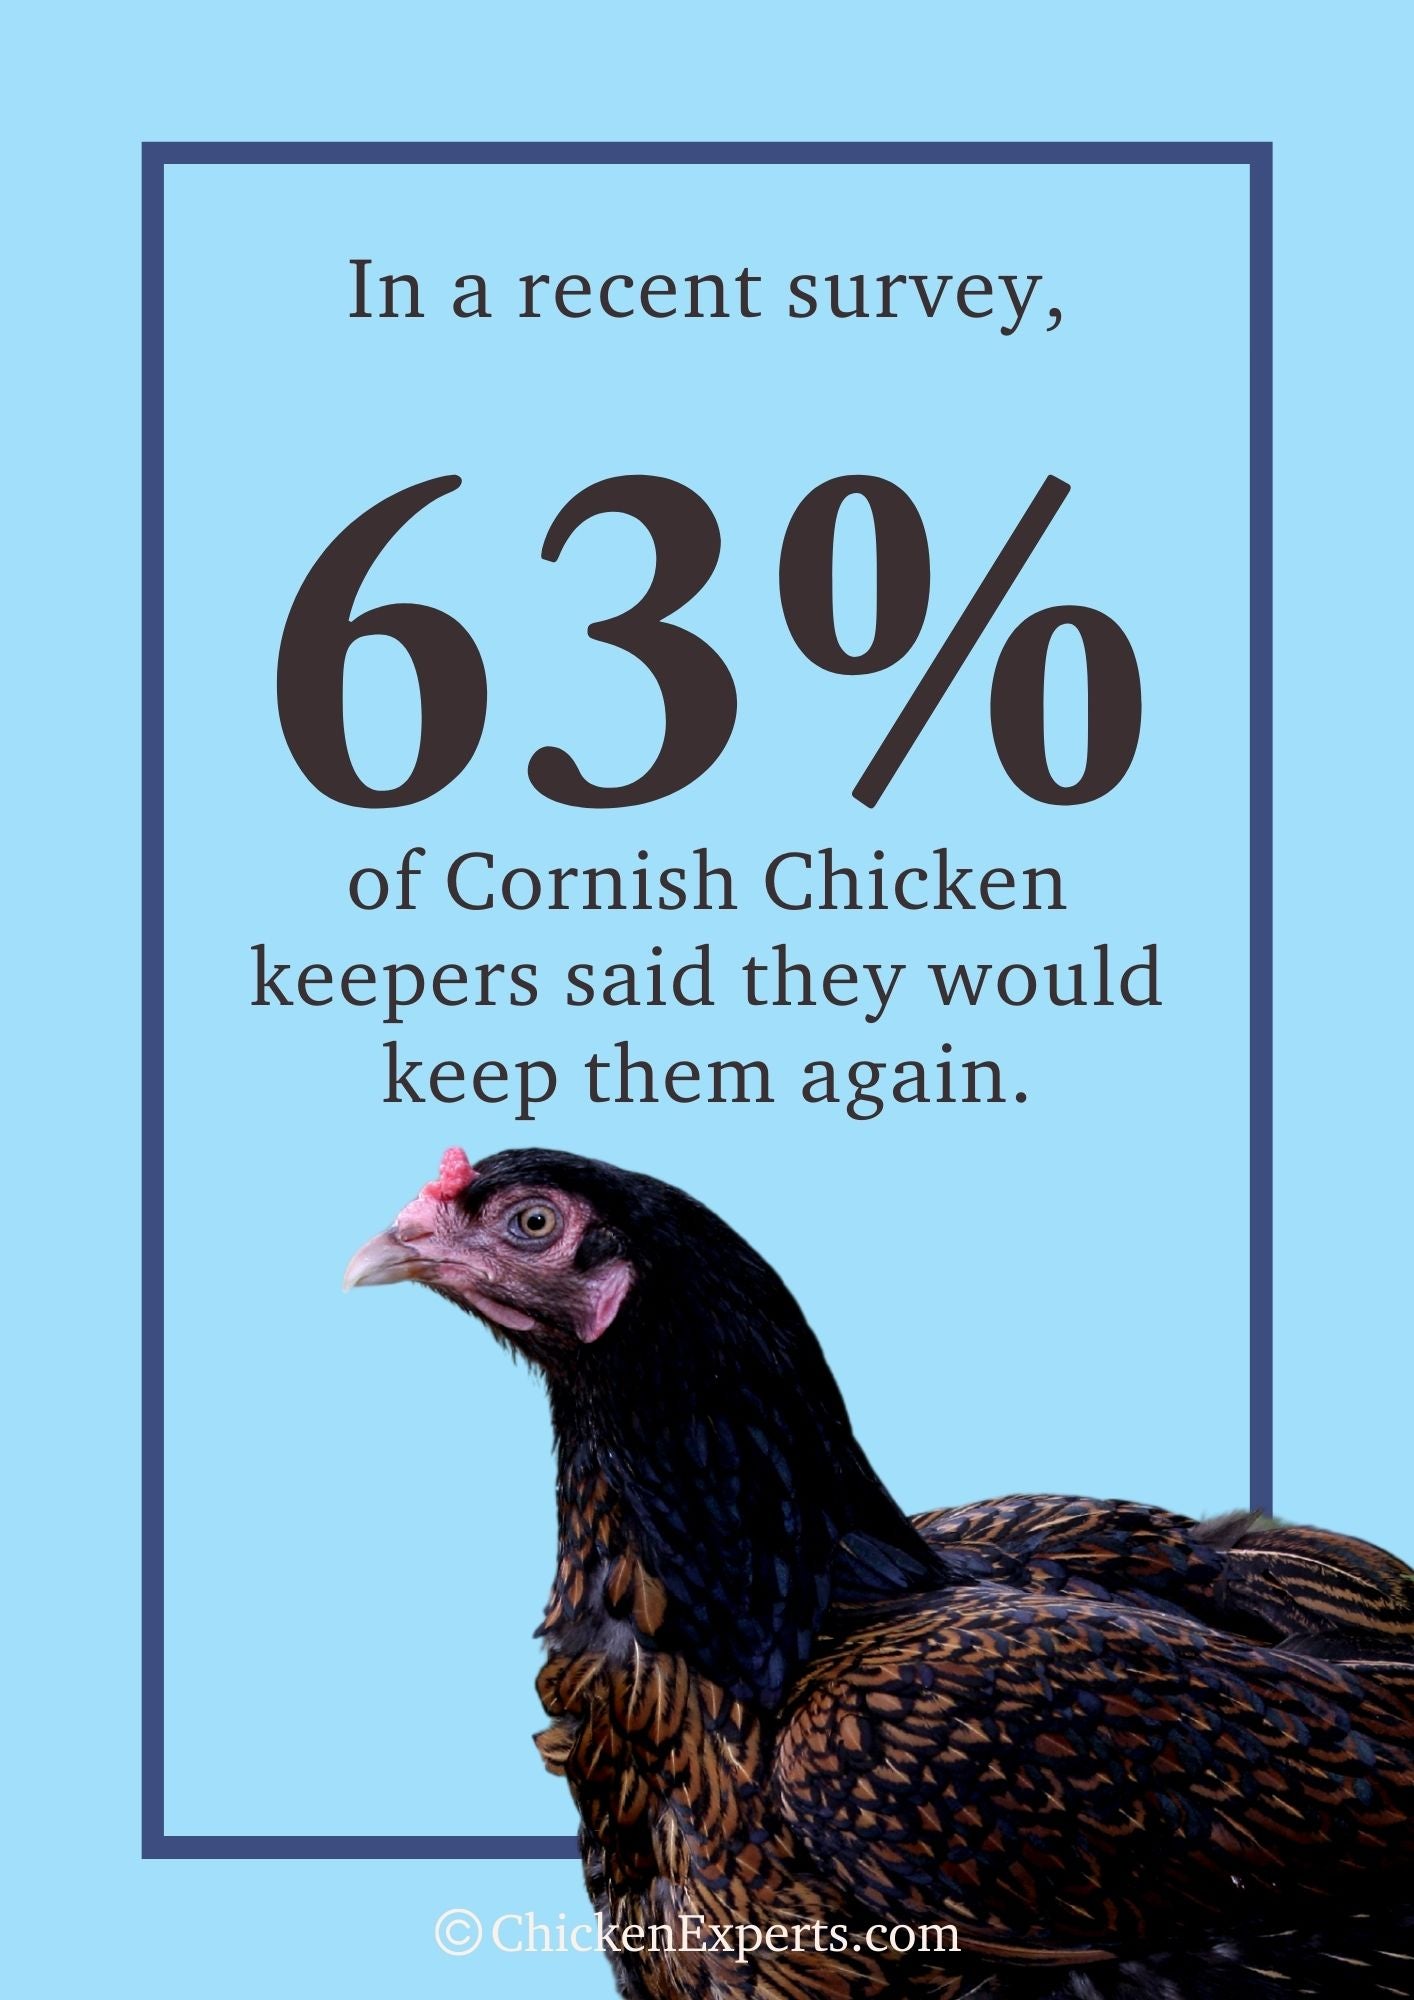 cornish chicken keepers said they would keep them again